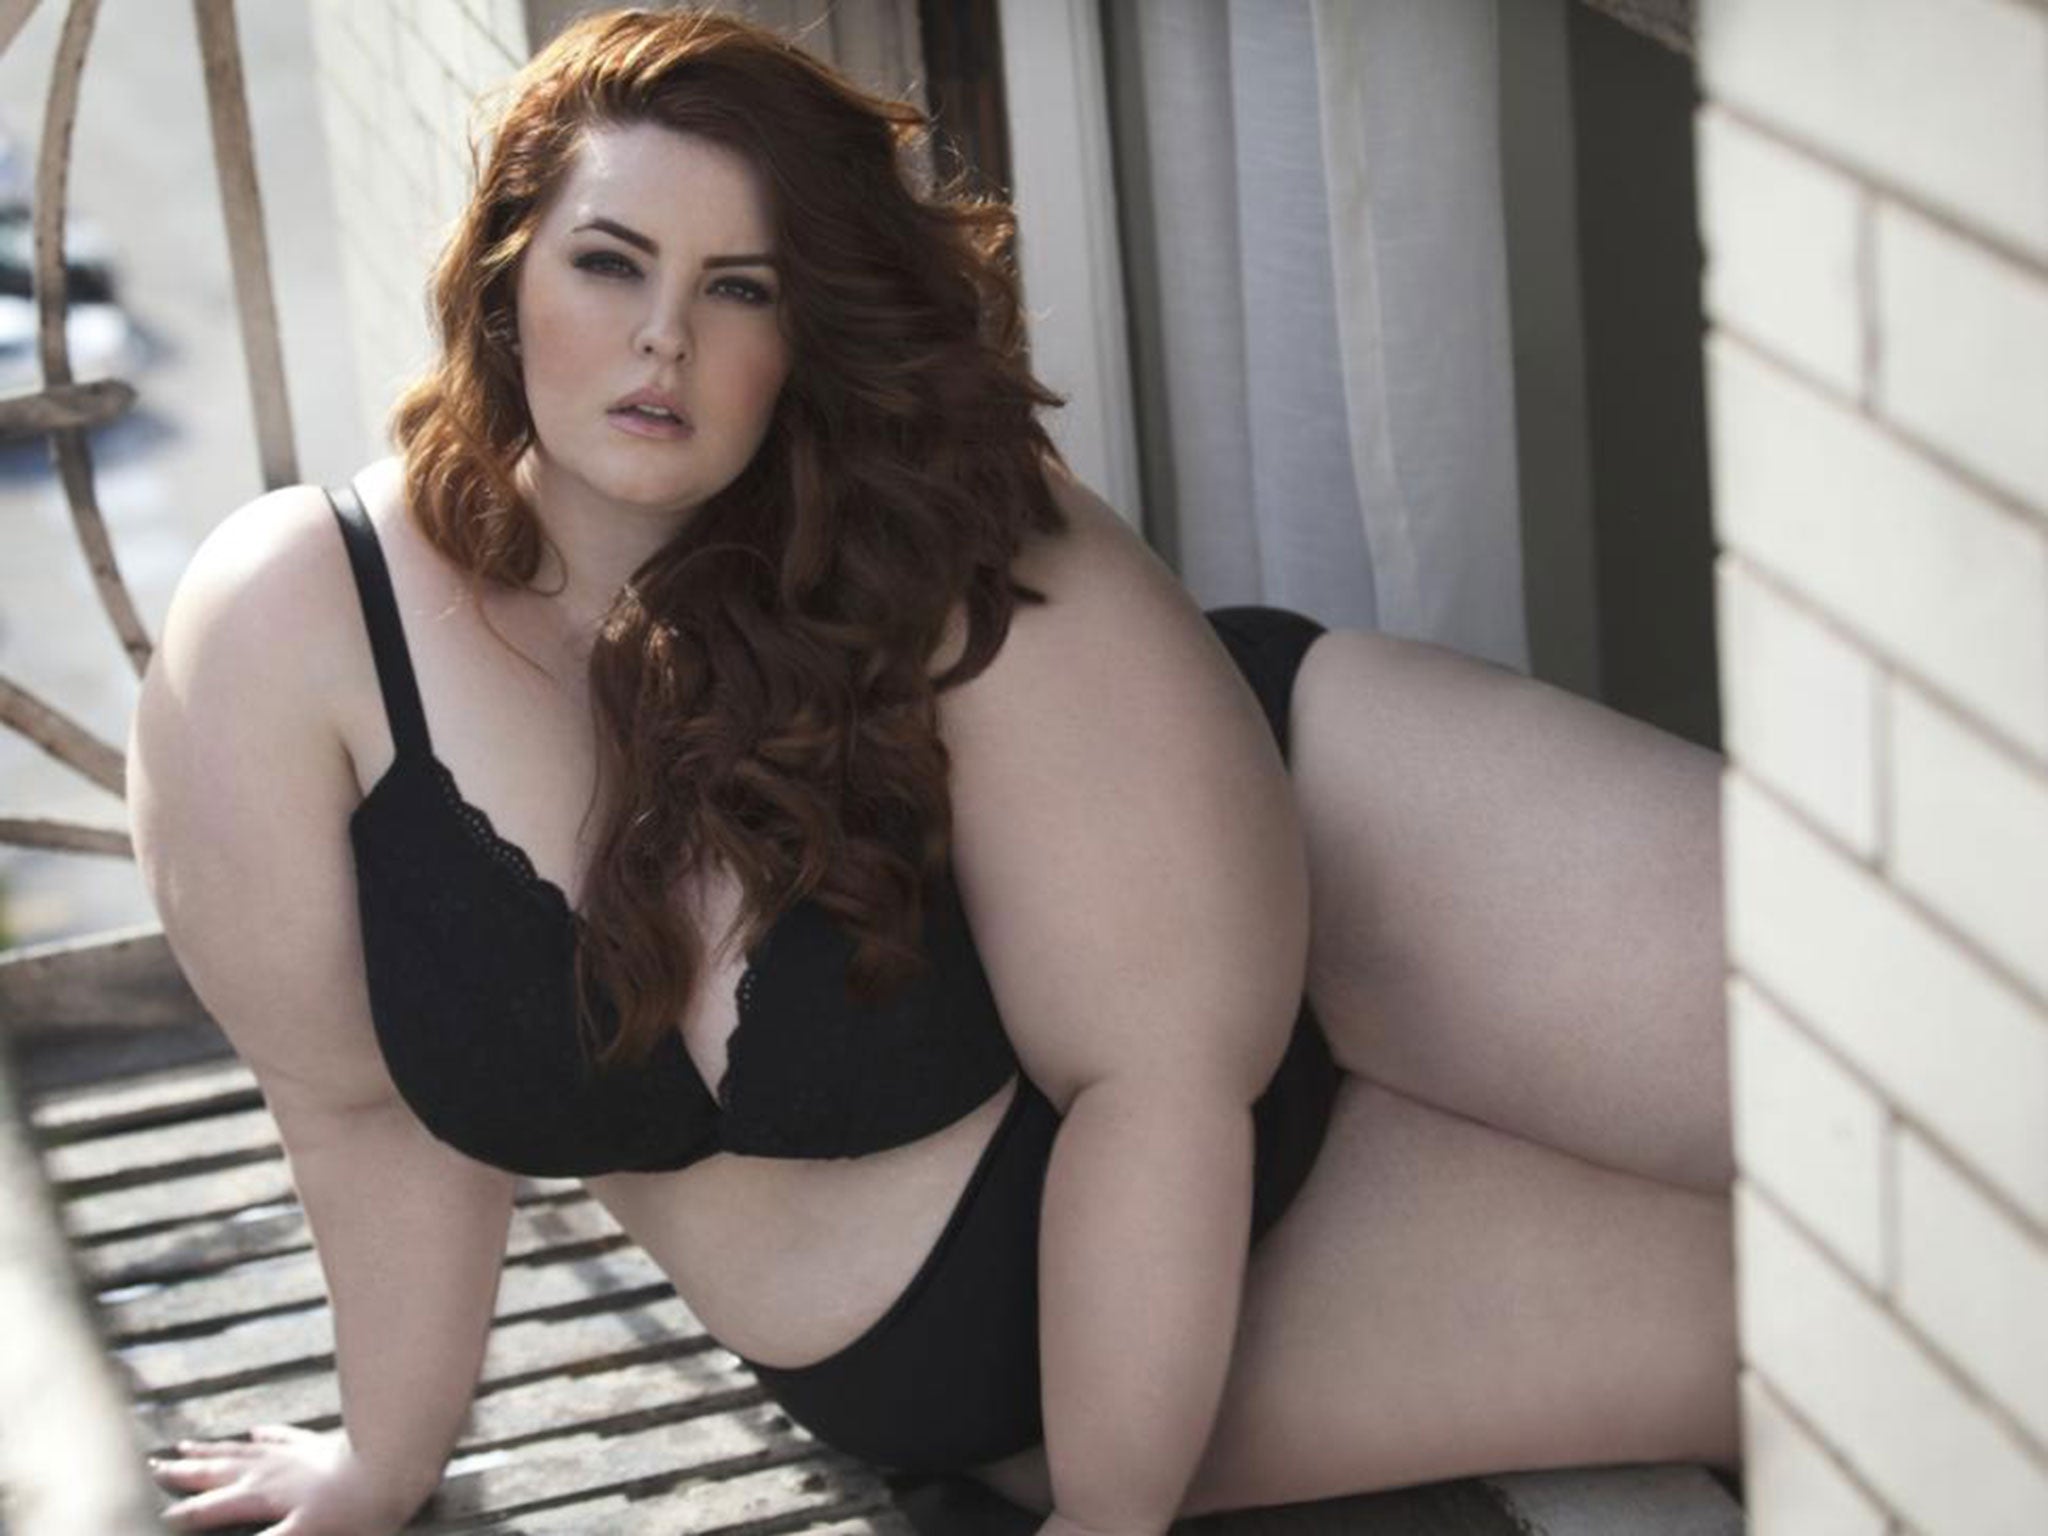 Tess Holliday: The supermodel leading the plus size fashion revolution, The Independent